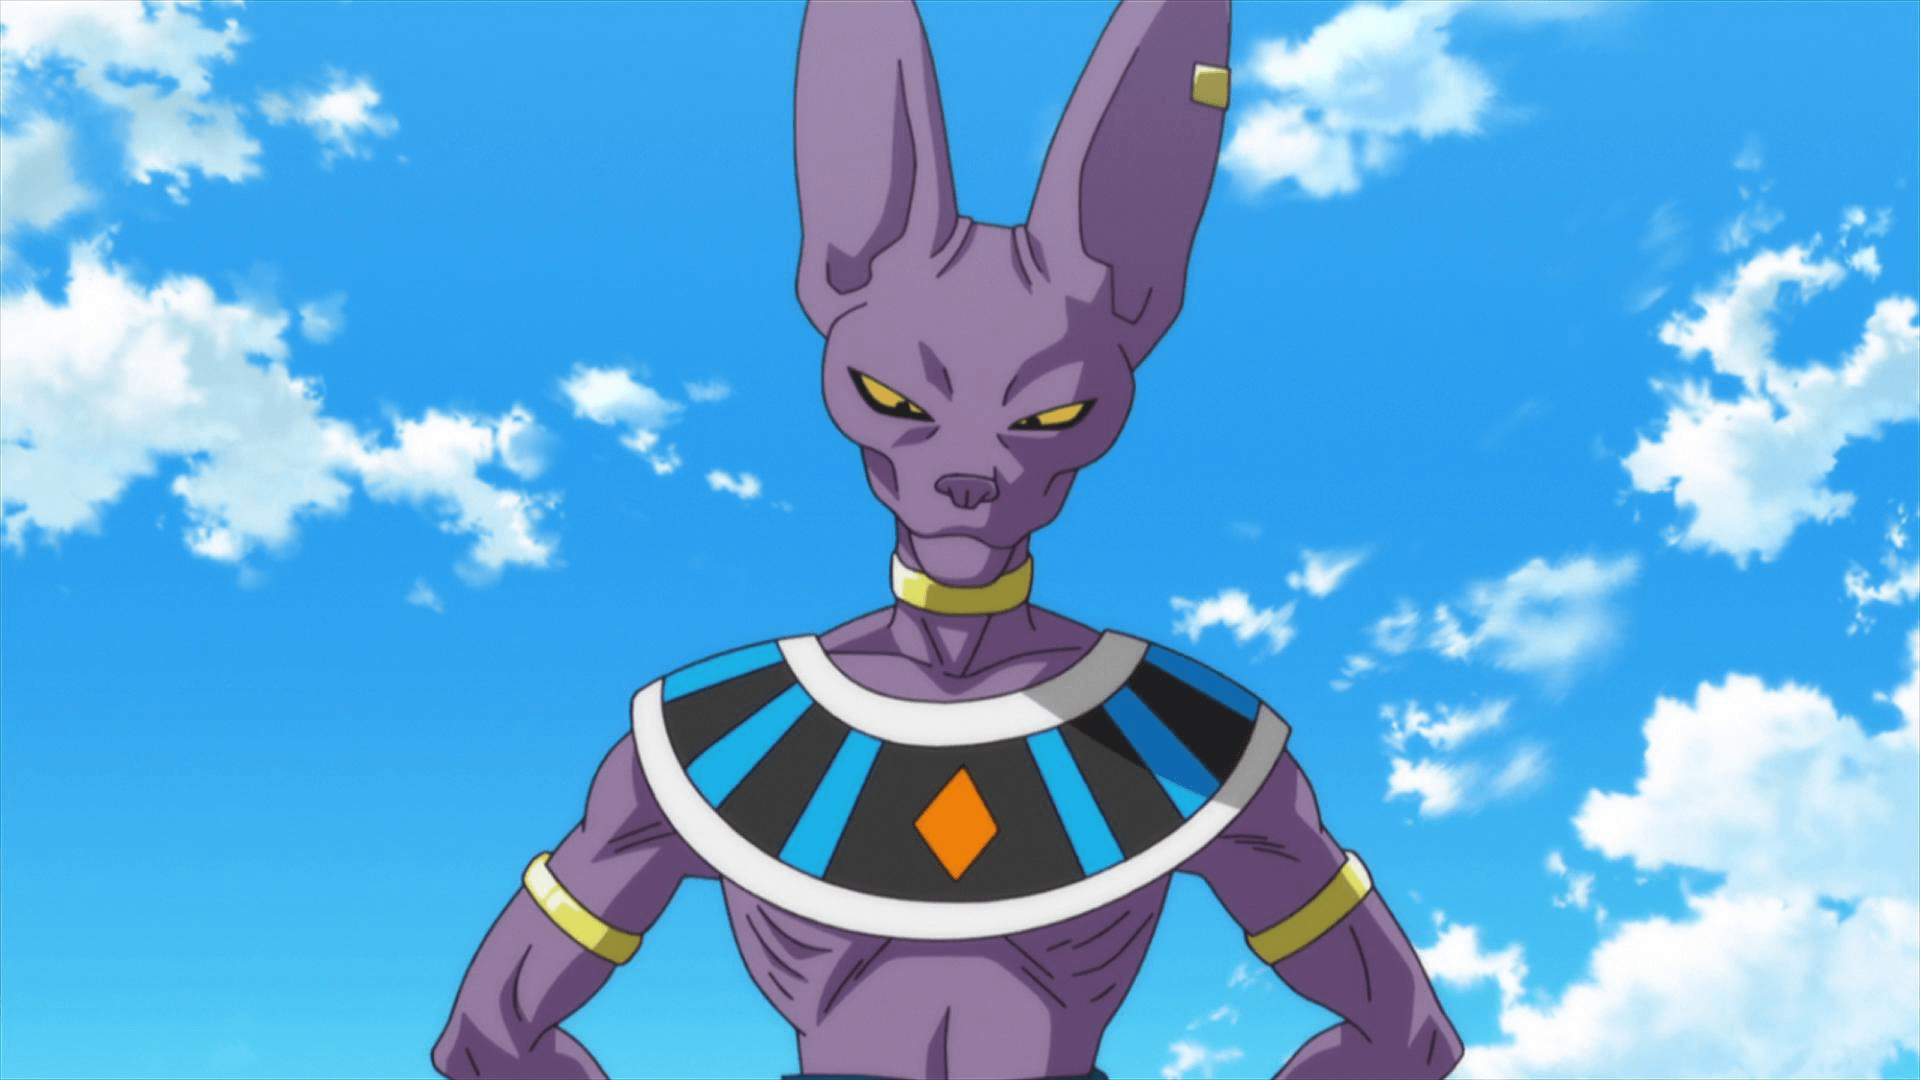 Beerus May Be The Greatest Antagonist in Dragon Ball So Far